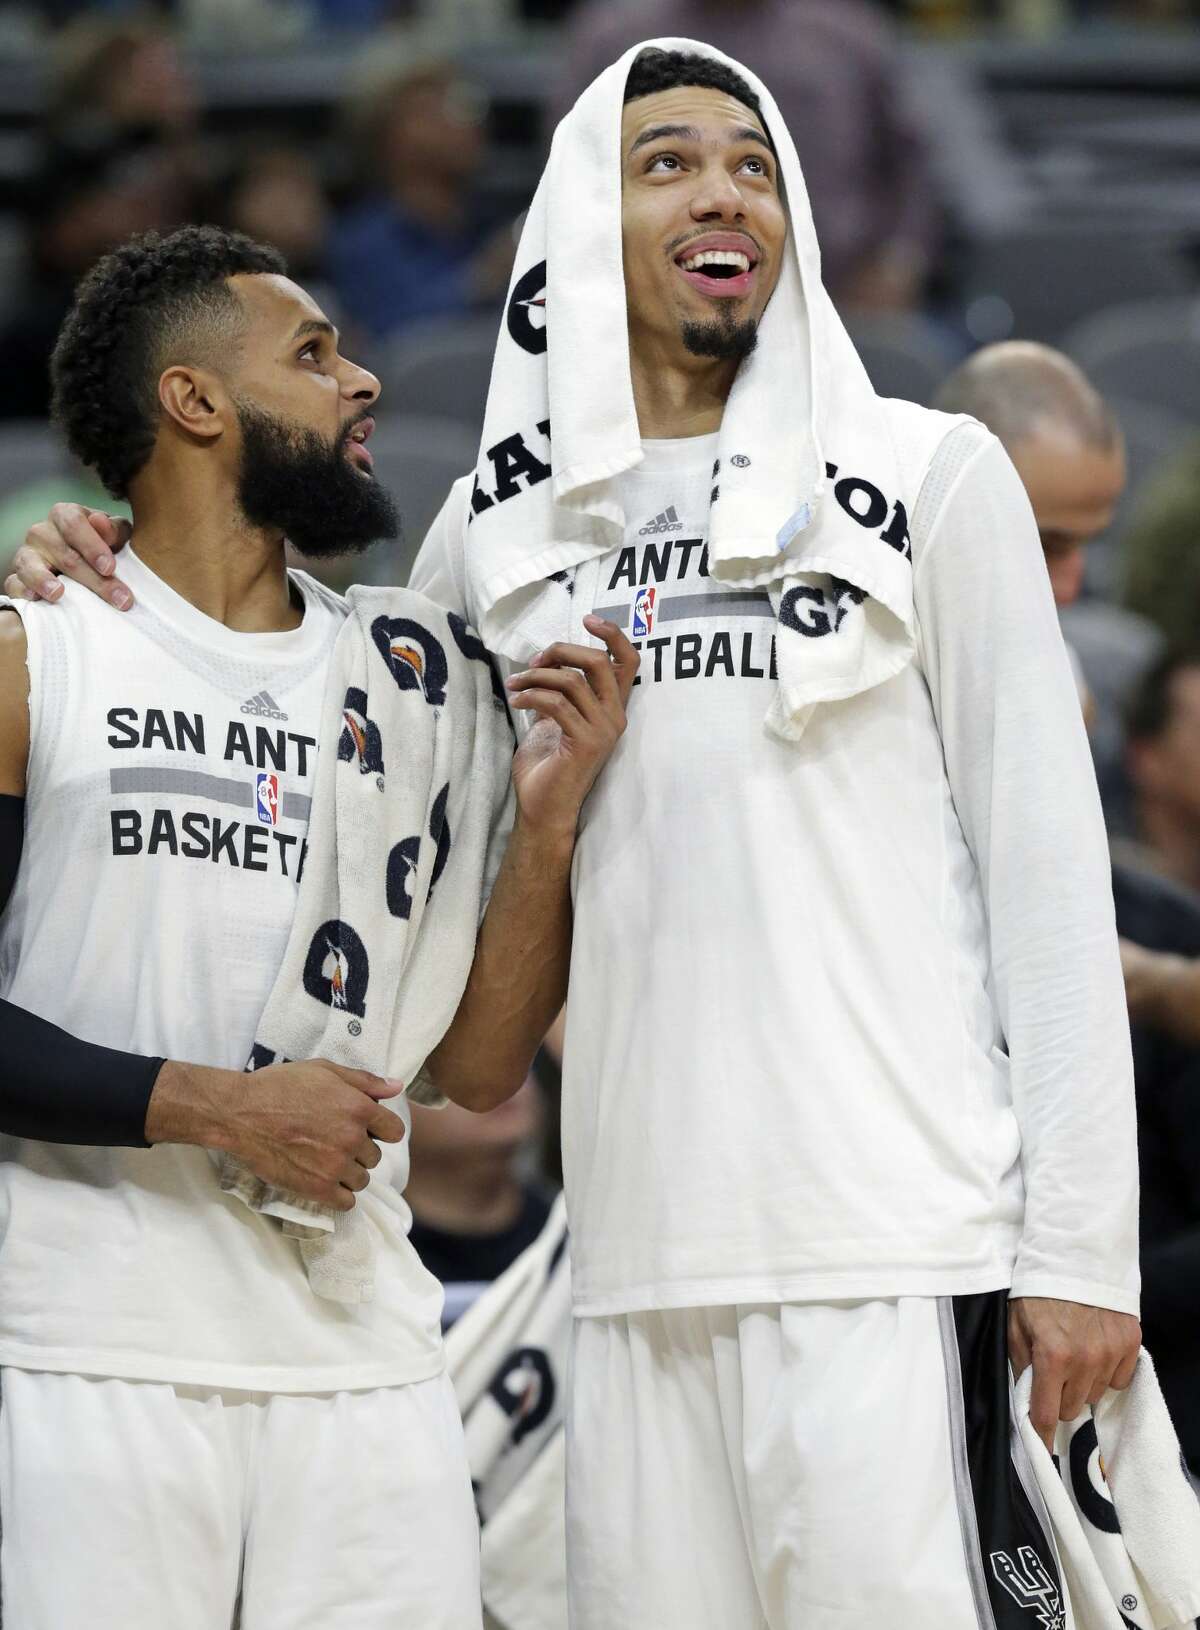 Danny Green and Patty Mills check the scoreboard as the Spurs pull off a 40 point win as the Spurs host the Lakers at the AT&T Center on January, 12, 2017.